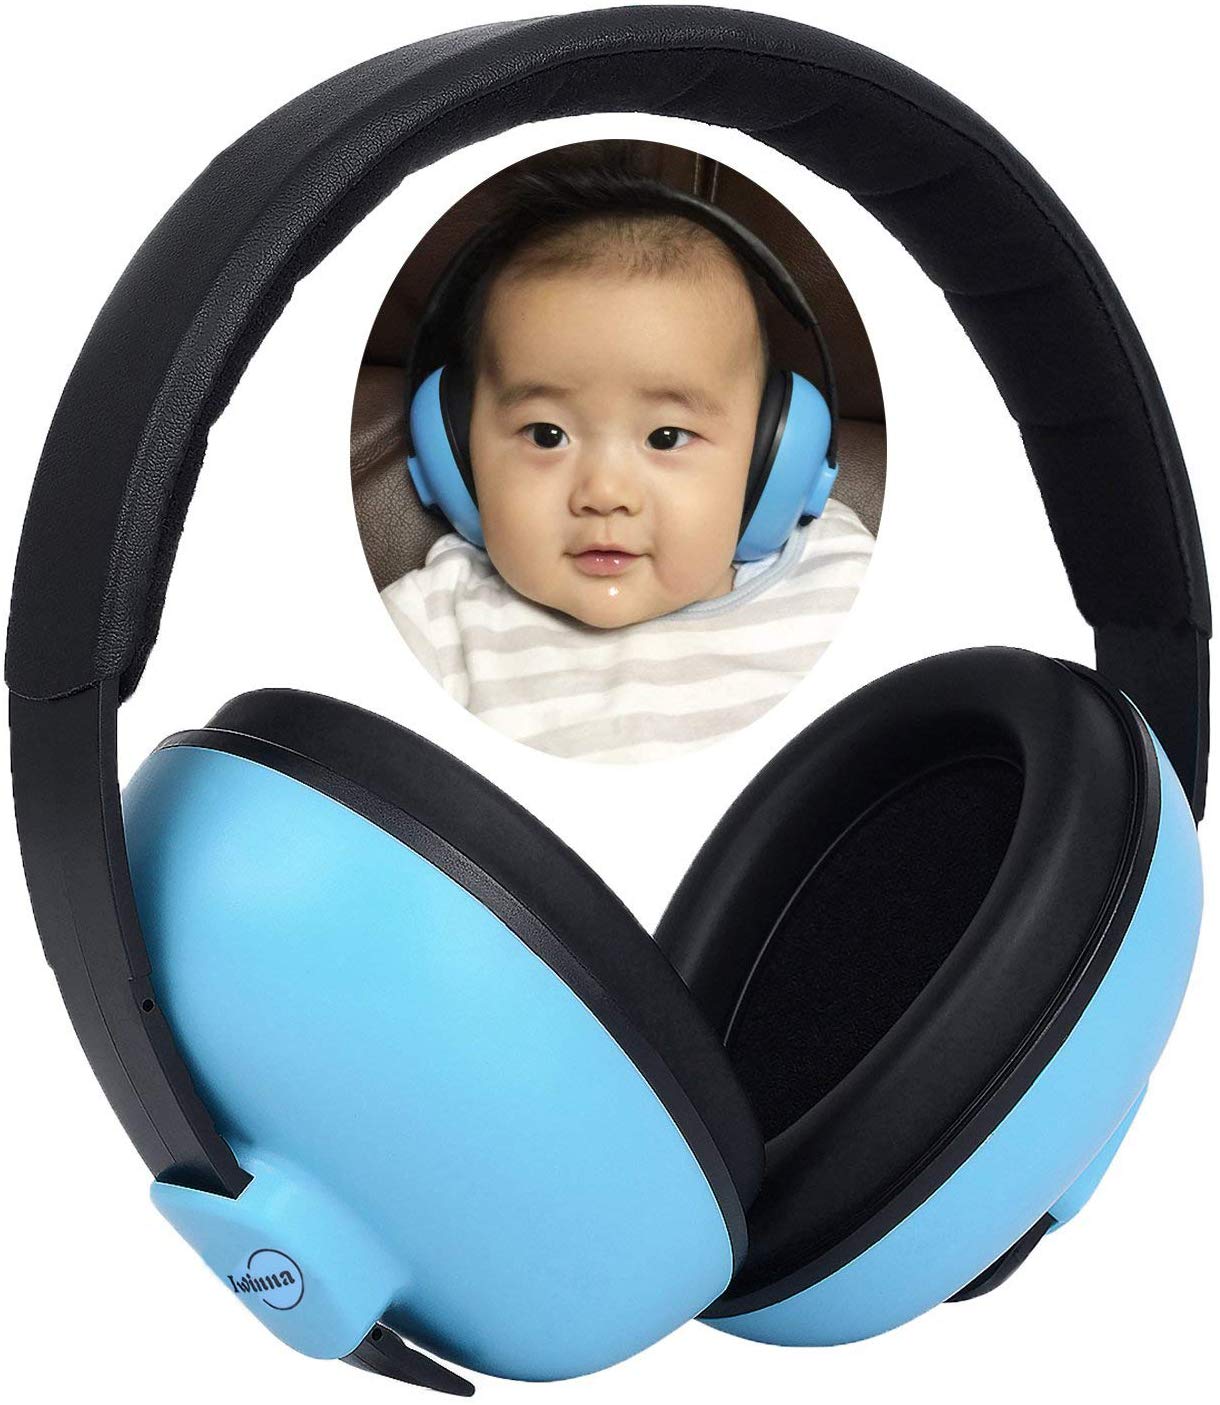 Baby Infant Earmuffs Ear muffs Sleeping Hearing Protection Noise Reducing Plug 